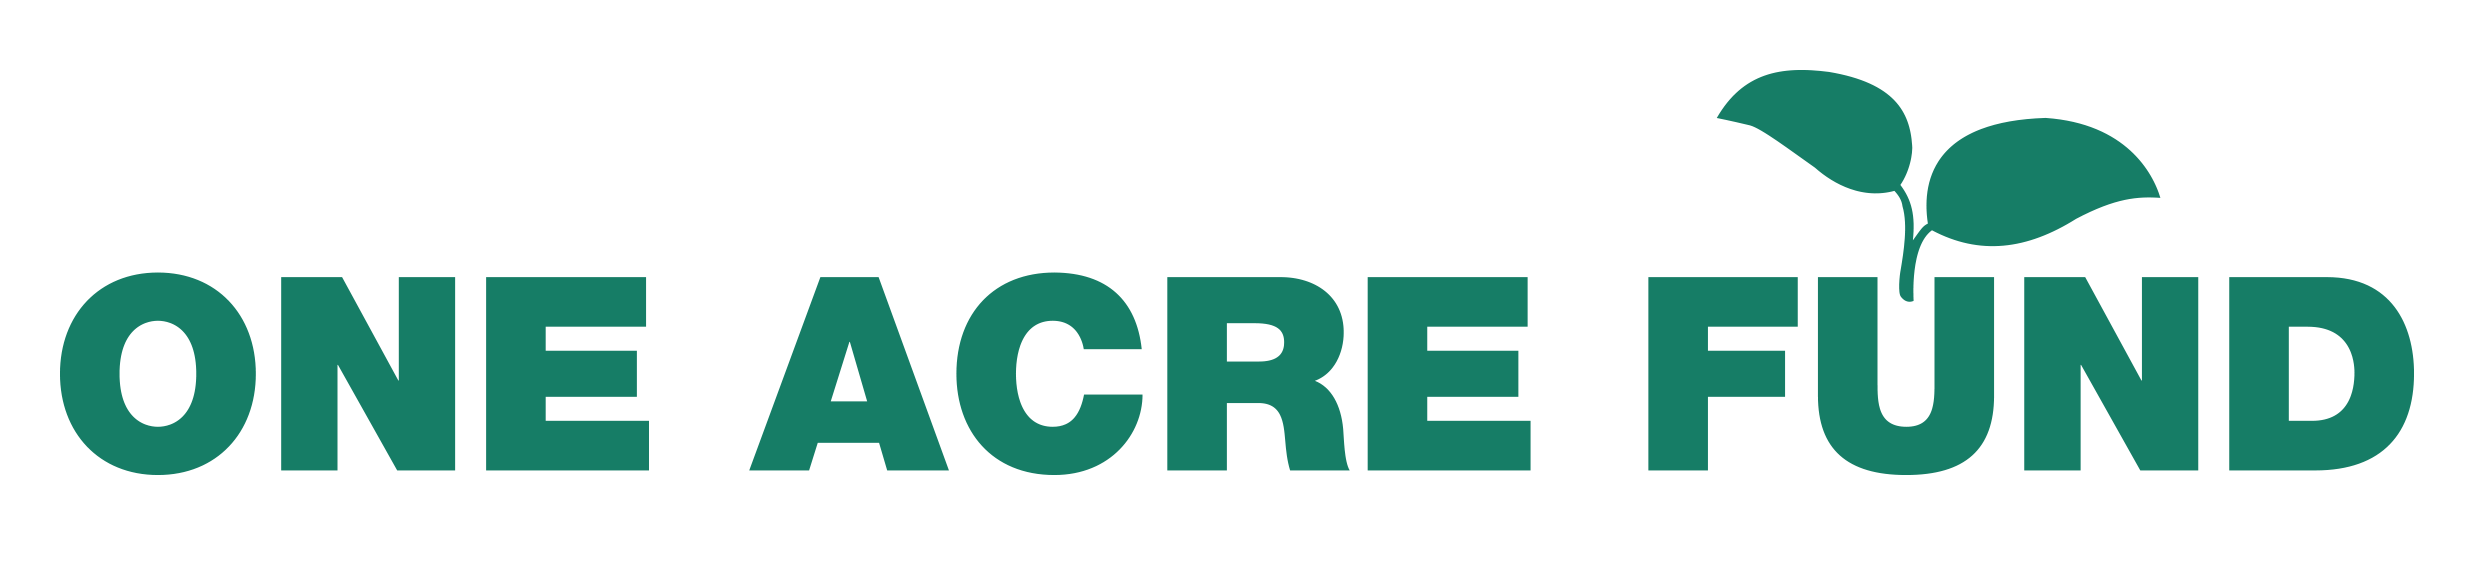 The logo for the One Acre Fund